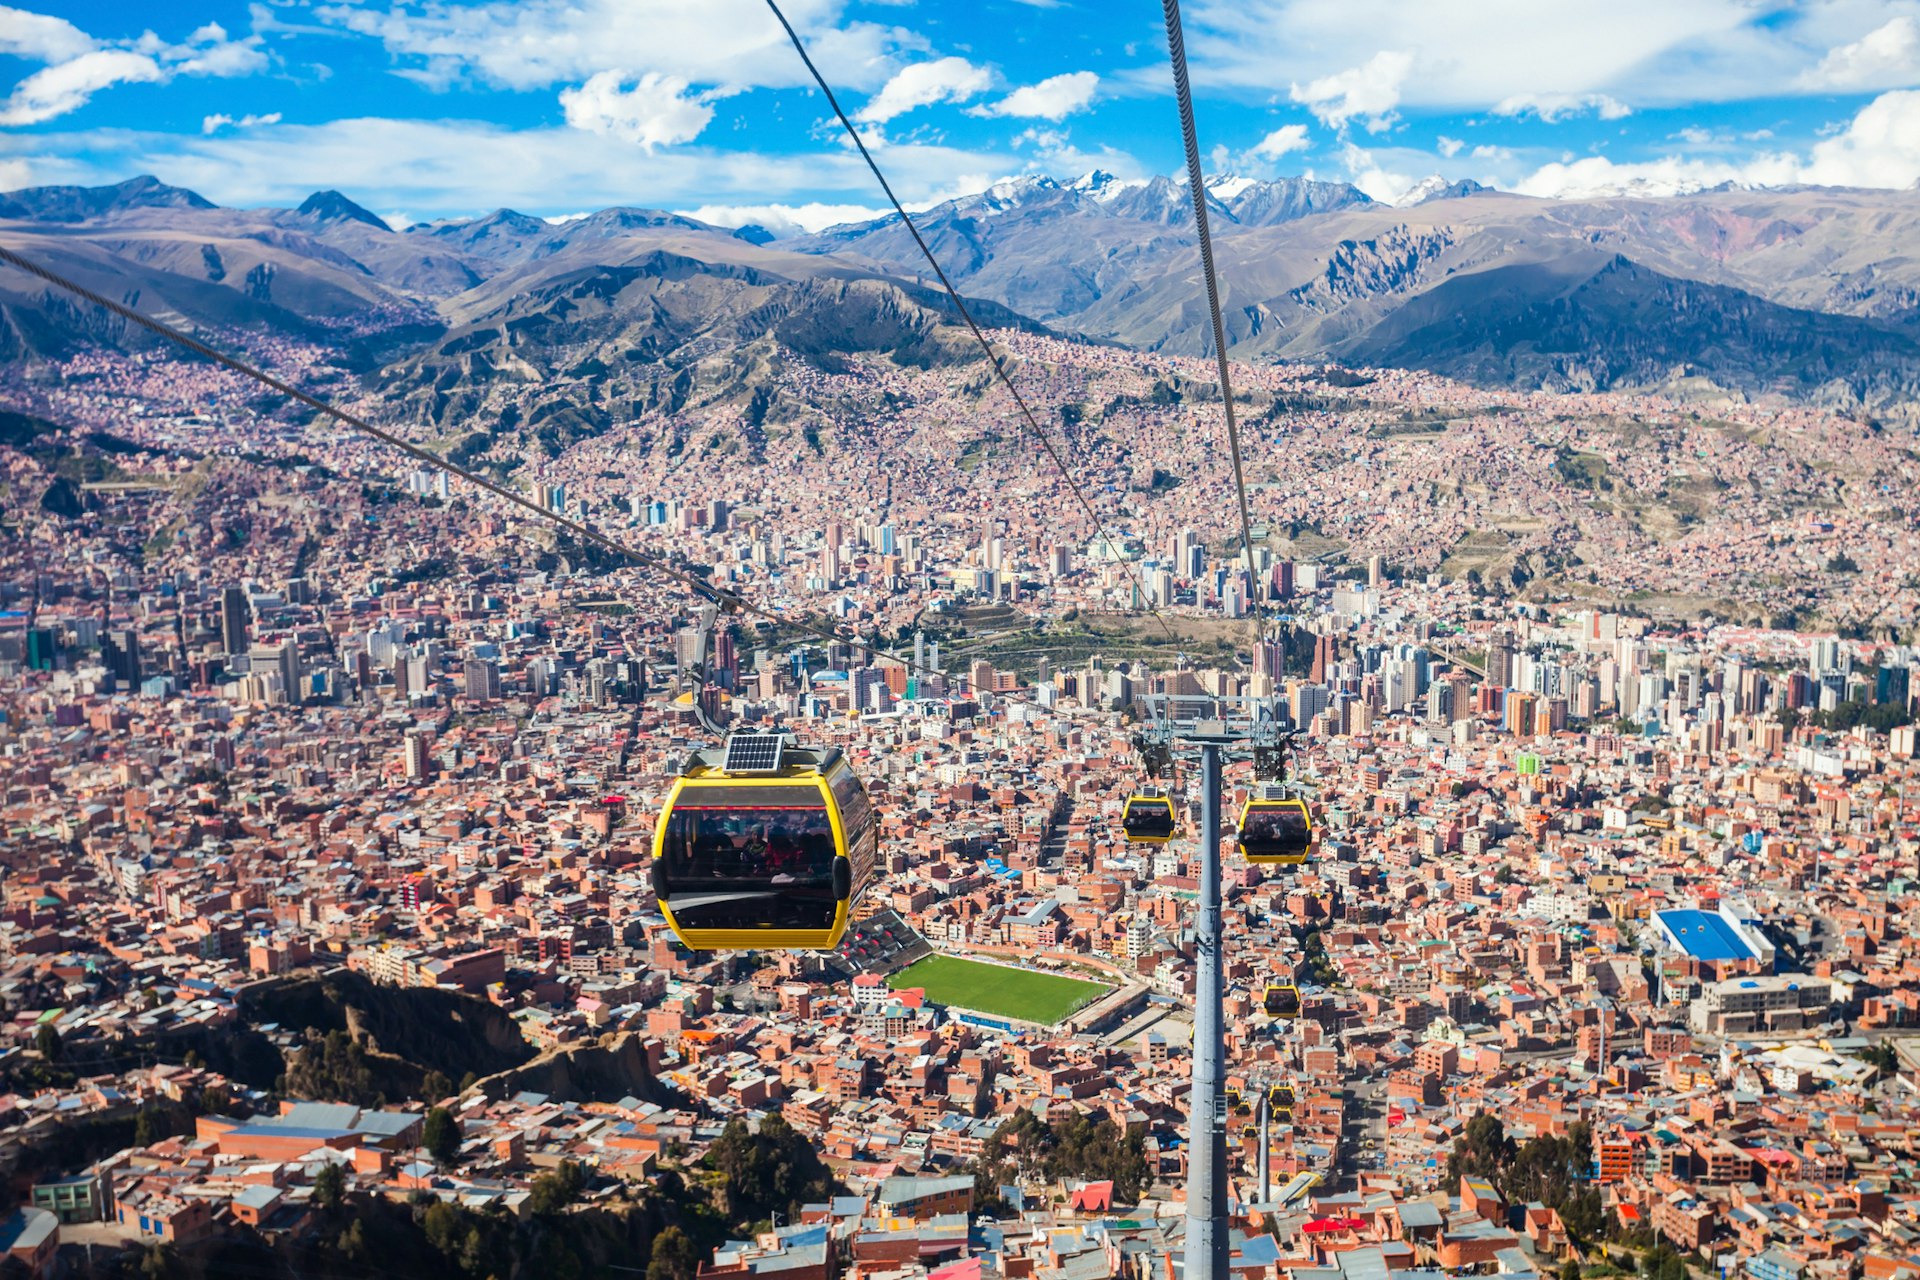 A cable car rises above a city densely packed with buildings